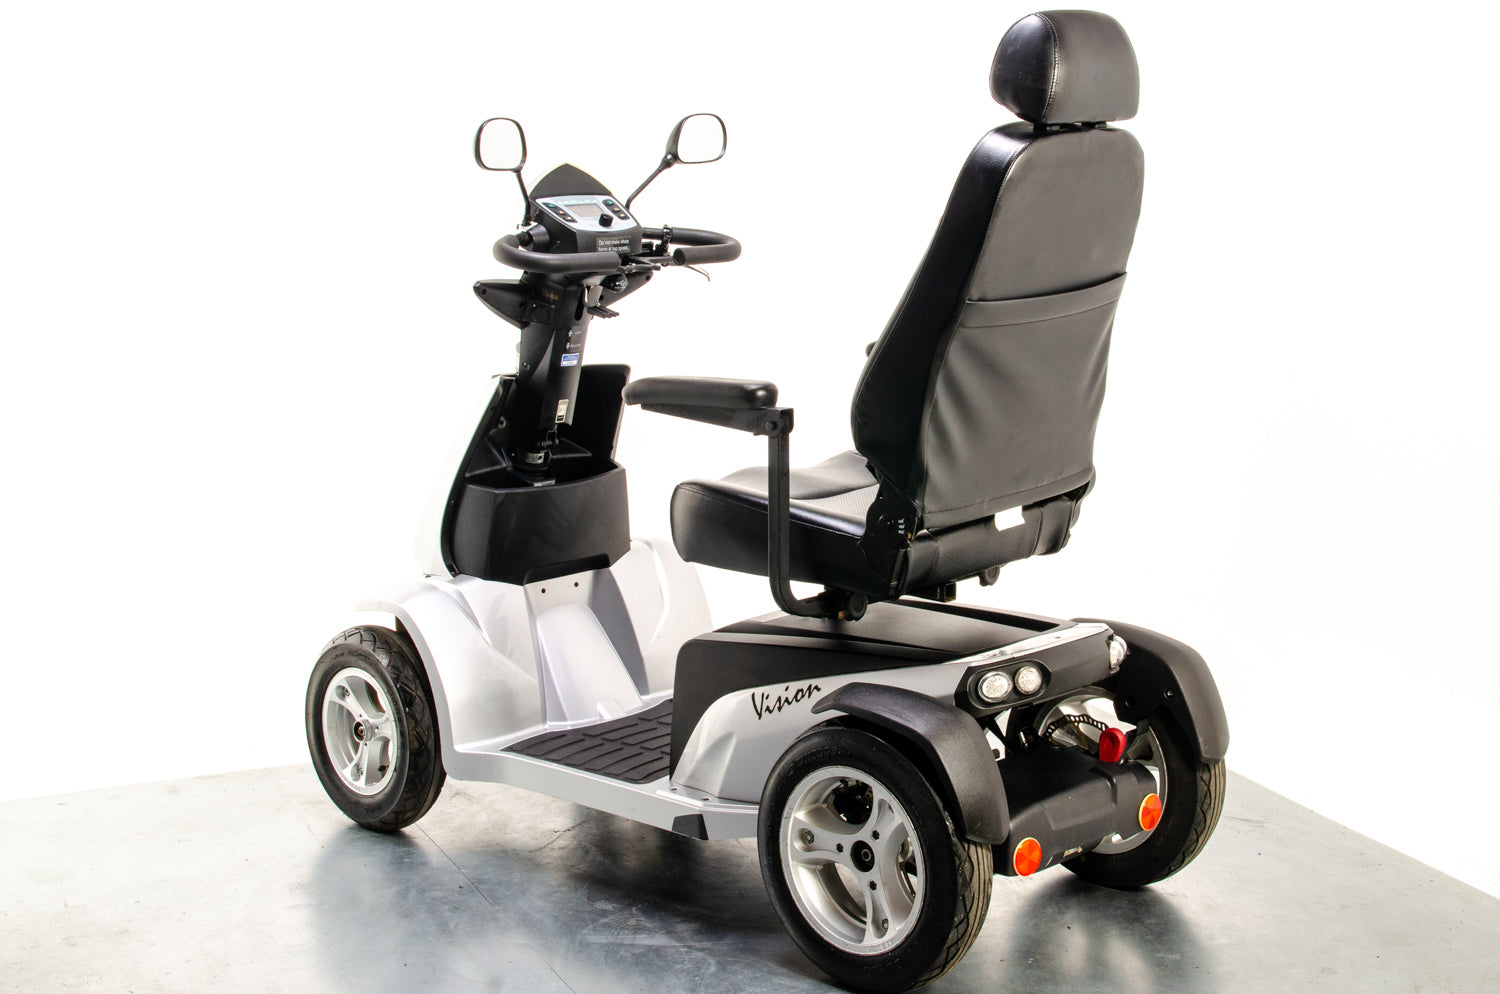 Rascal Vision Used Electric Mobility Scooter 8mph Large All-Terrain Road Legal Silver Pneumatic Tyres 13062